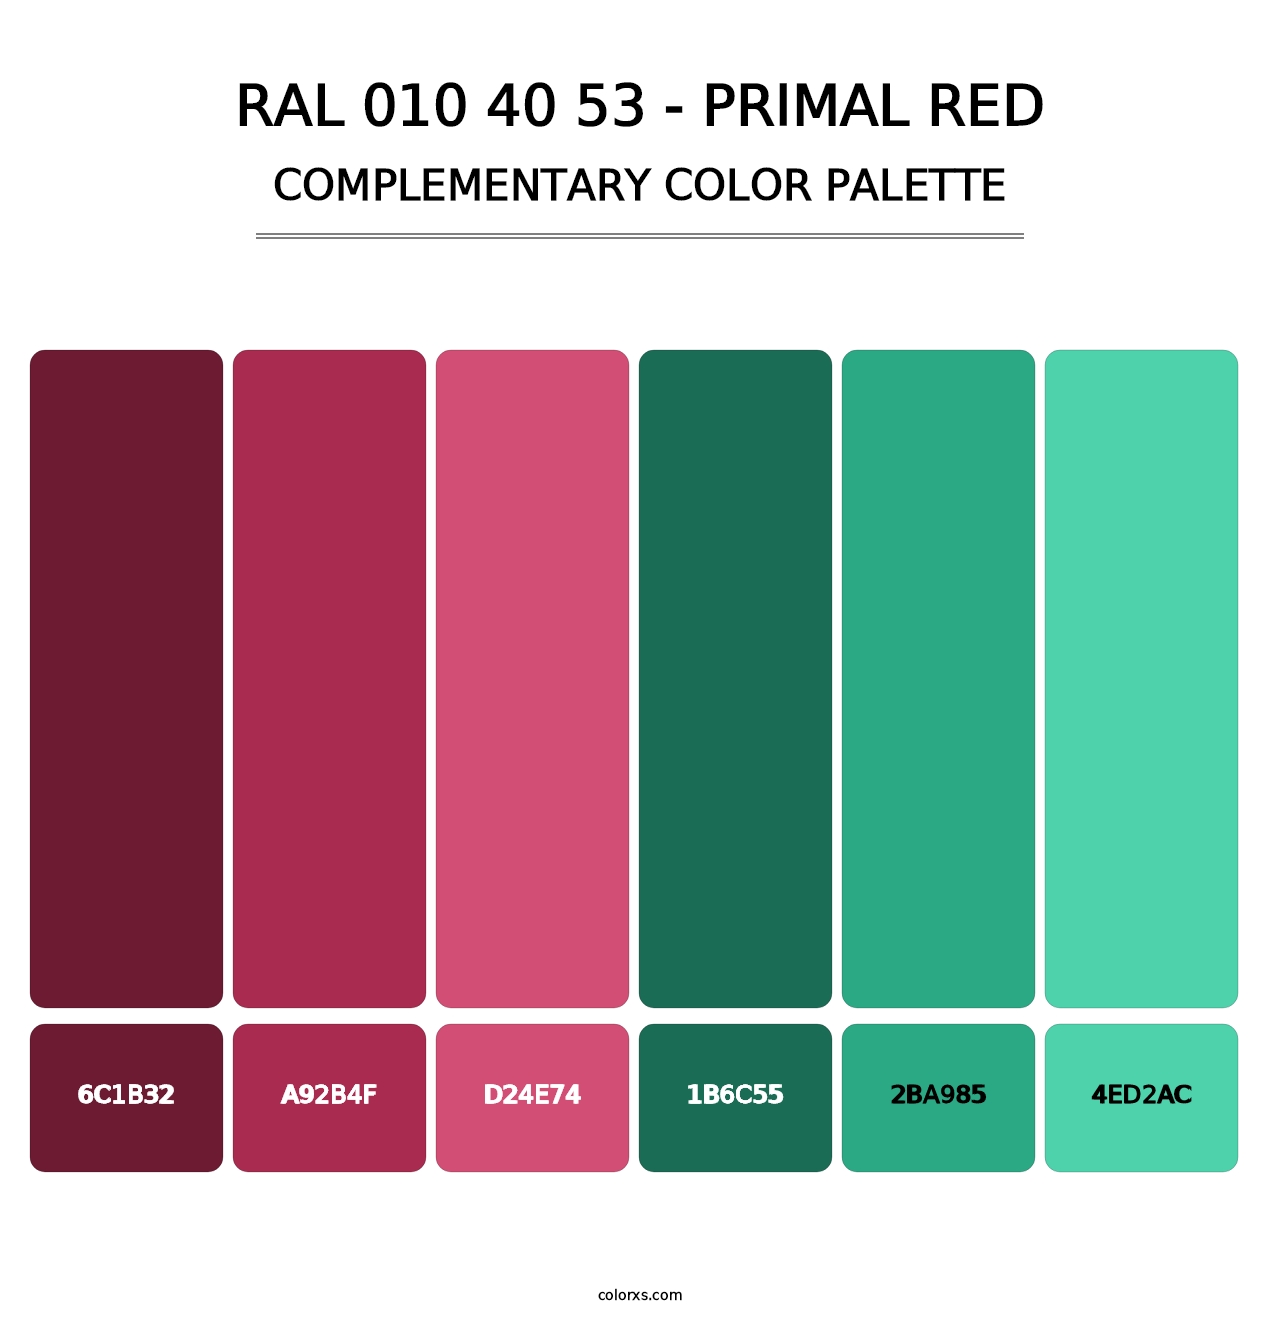 RAL 010 40 53 - Primal Red - Complementary Color Palette